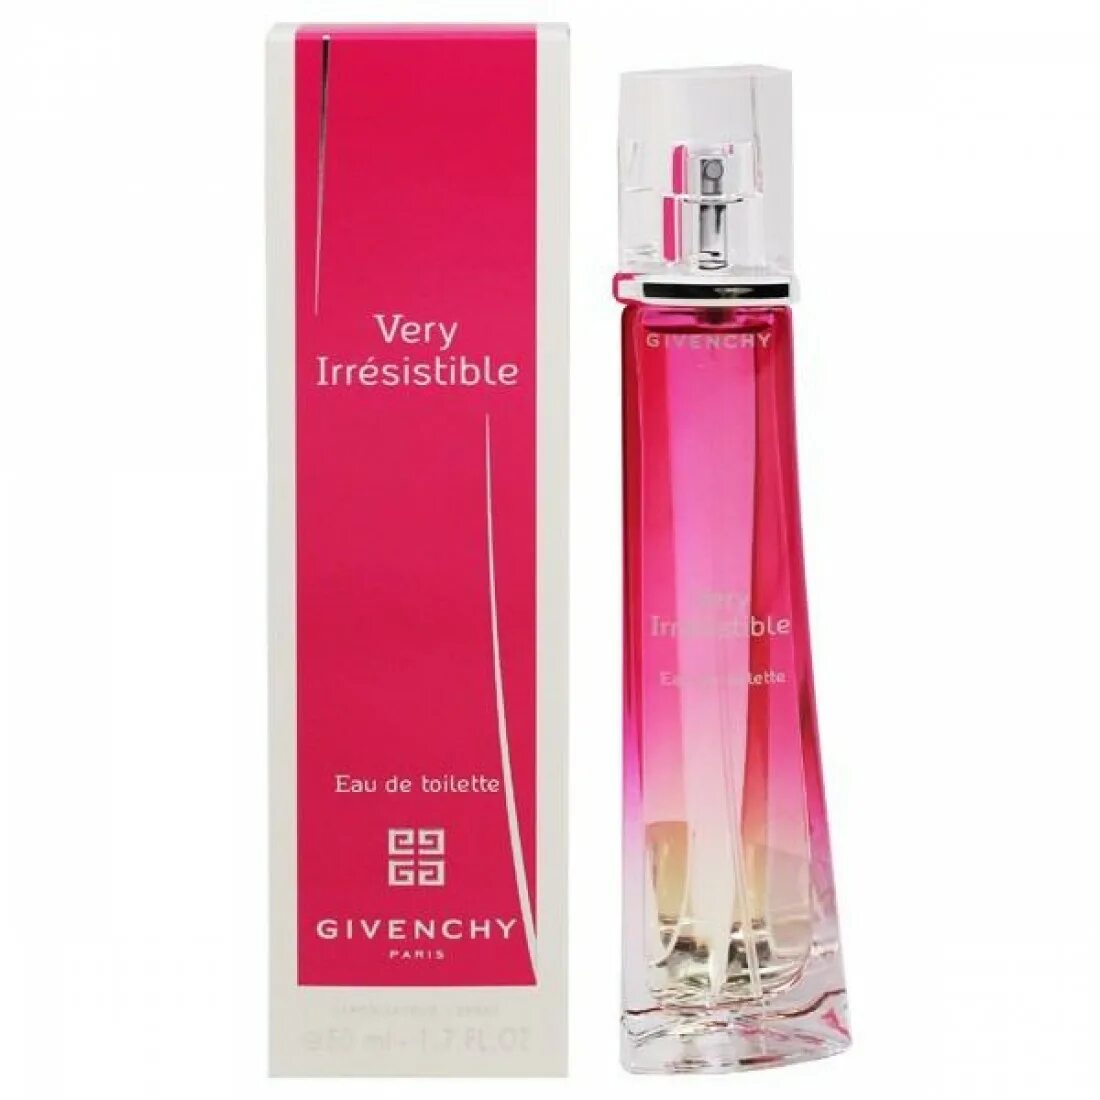 Very irresistible Givenchy женские. Туалетная вода Givenchy very irresistible. Givenchy very irresistible EDT. (Givenchy) very irresistible туалетная вода 50мл. Givenchy irresistible туалетная